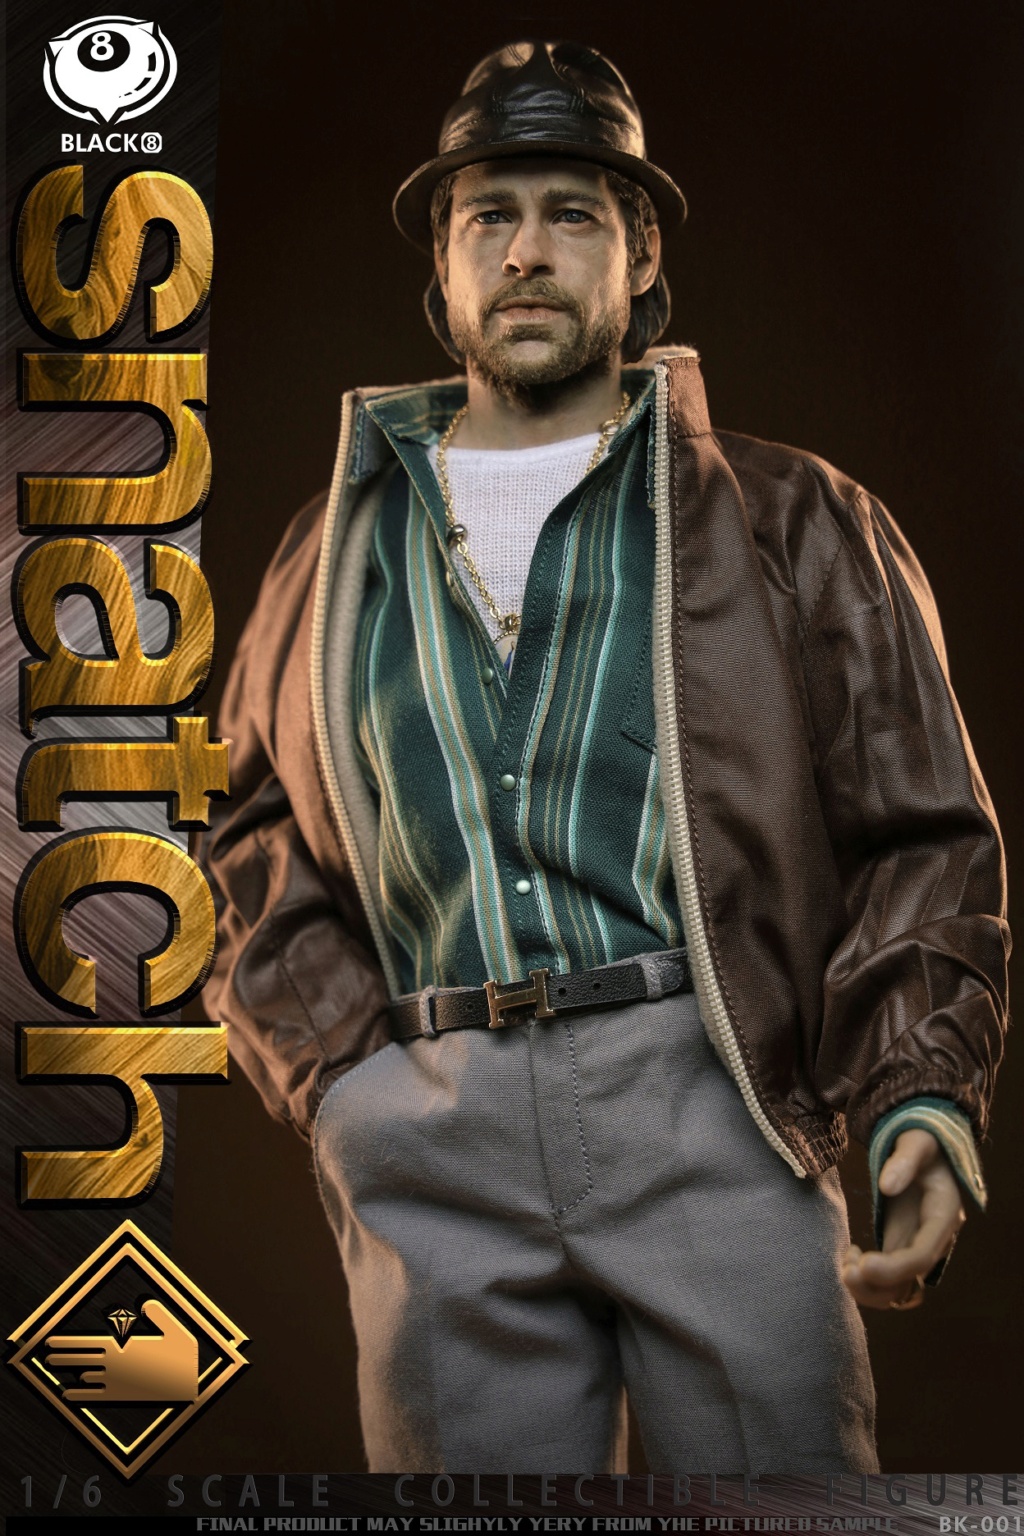 movie-based - NEW PRODUCT: BLACK 8 STUDIO: 1/6 "Snatch" Collectible Doll#BK-001 16032311